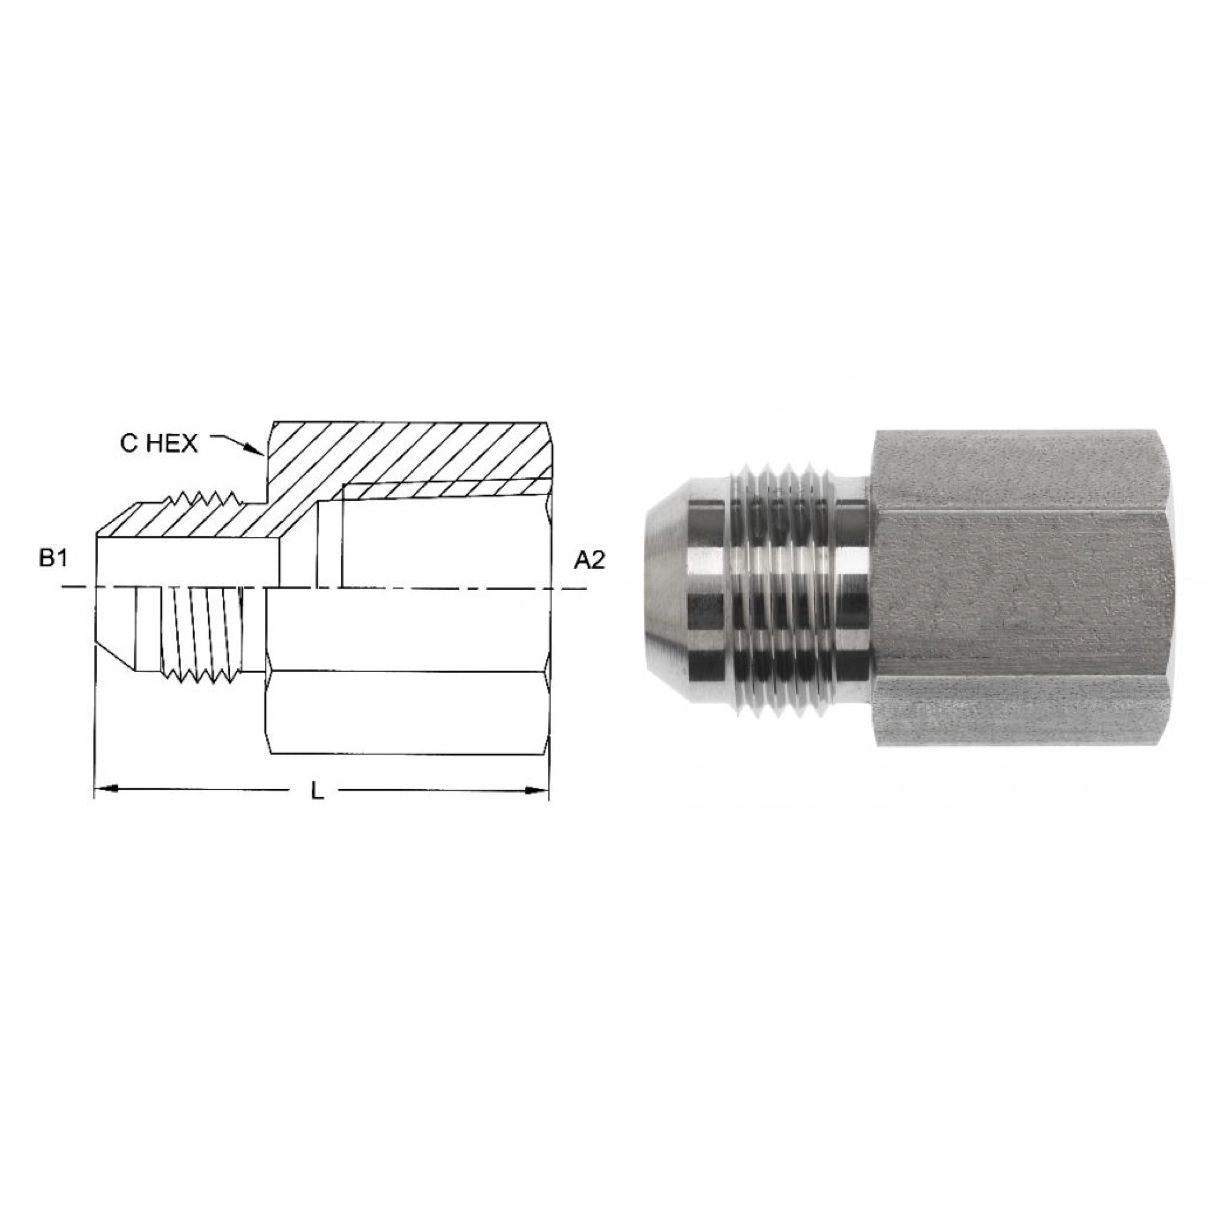 2405-20-24 : OneHydraulics  Adapter, Straight, 1.25 (1-1/4") Male NPT x 1.5 (1-1/2") Female, Steel, 2000psi